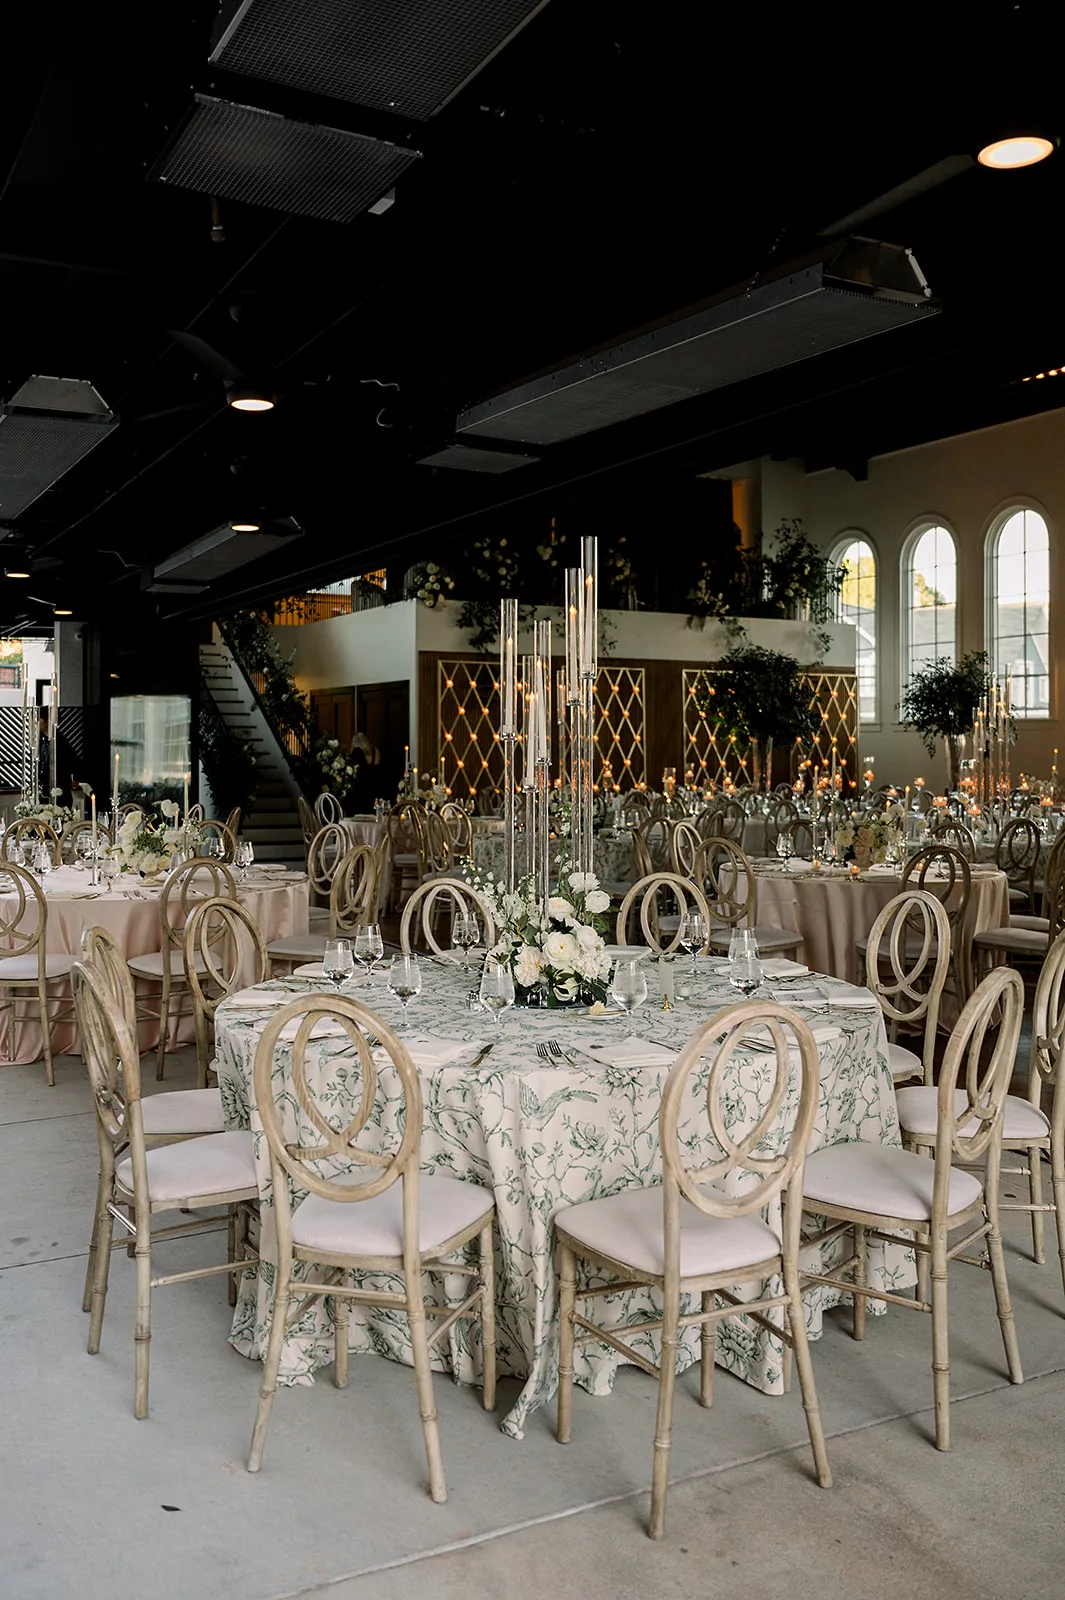 Details of an indoor wedding reception set up with floral linens